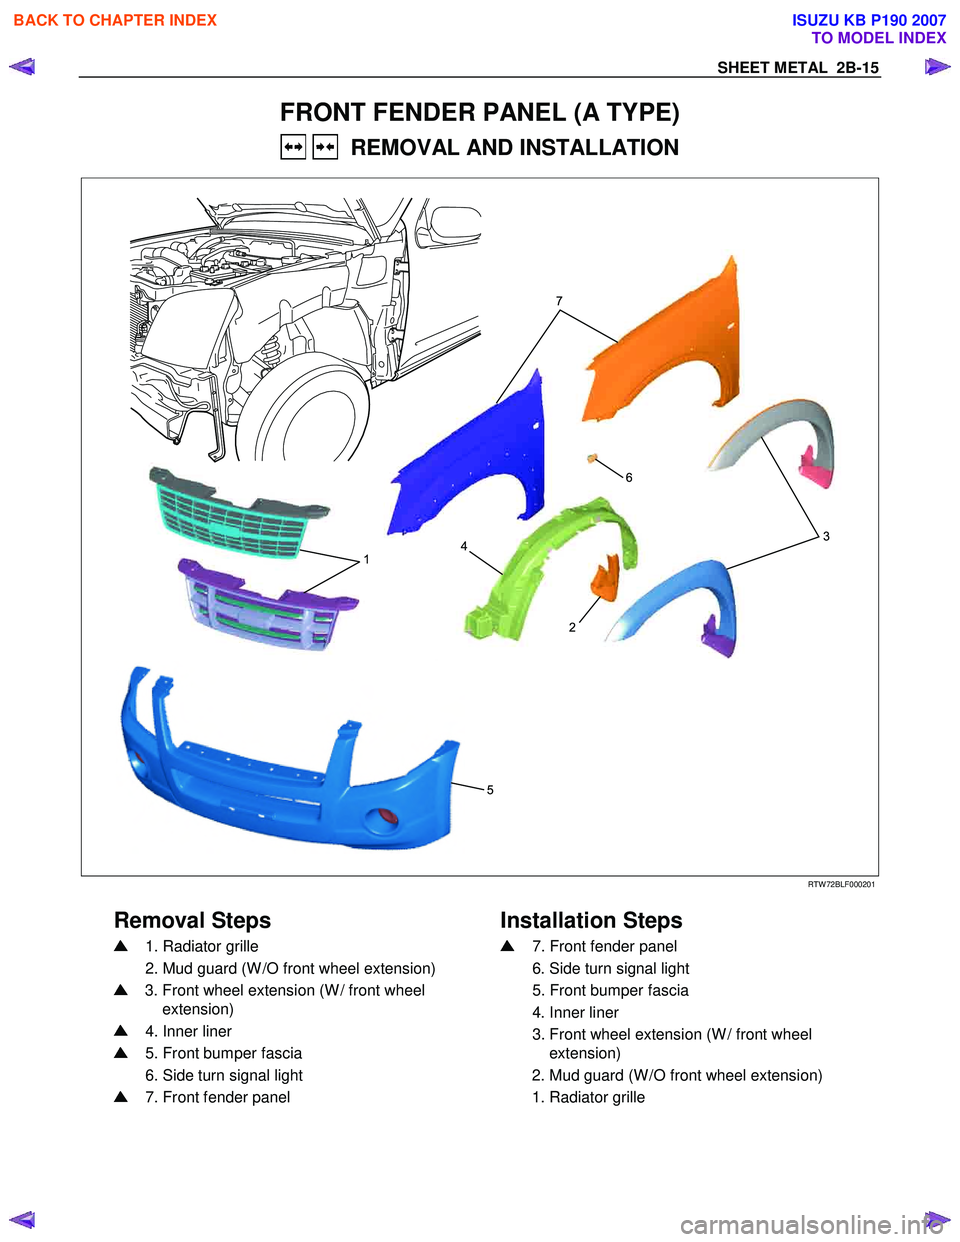 ISUZU KB P190 2007  Workshop User Guide SHEET METAL  2B-15 
FRONT FENDER PANEL (A TYPE)  
   REMOVAL AND INSTALLATION 
  
1
52
4
6
3
7
 
 RTW 72BLF000201 
 
Removal Steps 
 Installation Steps 
 1. Radiator grille  
  2. Mud guard (W /O fron